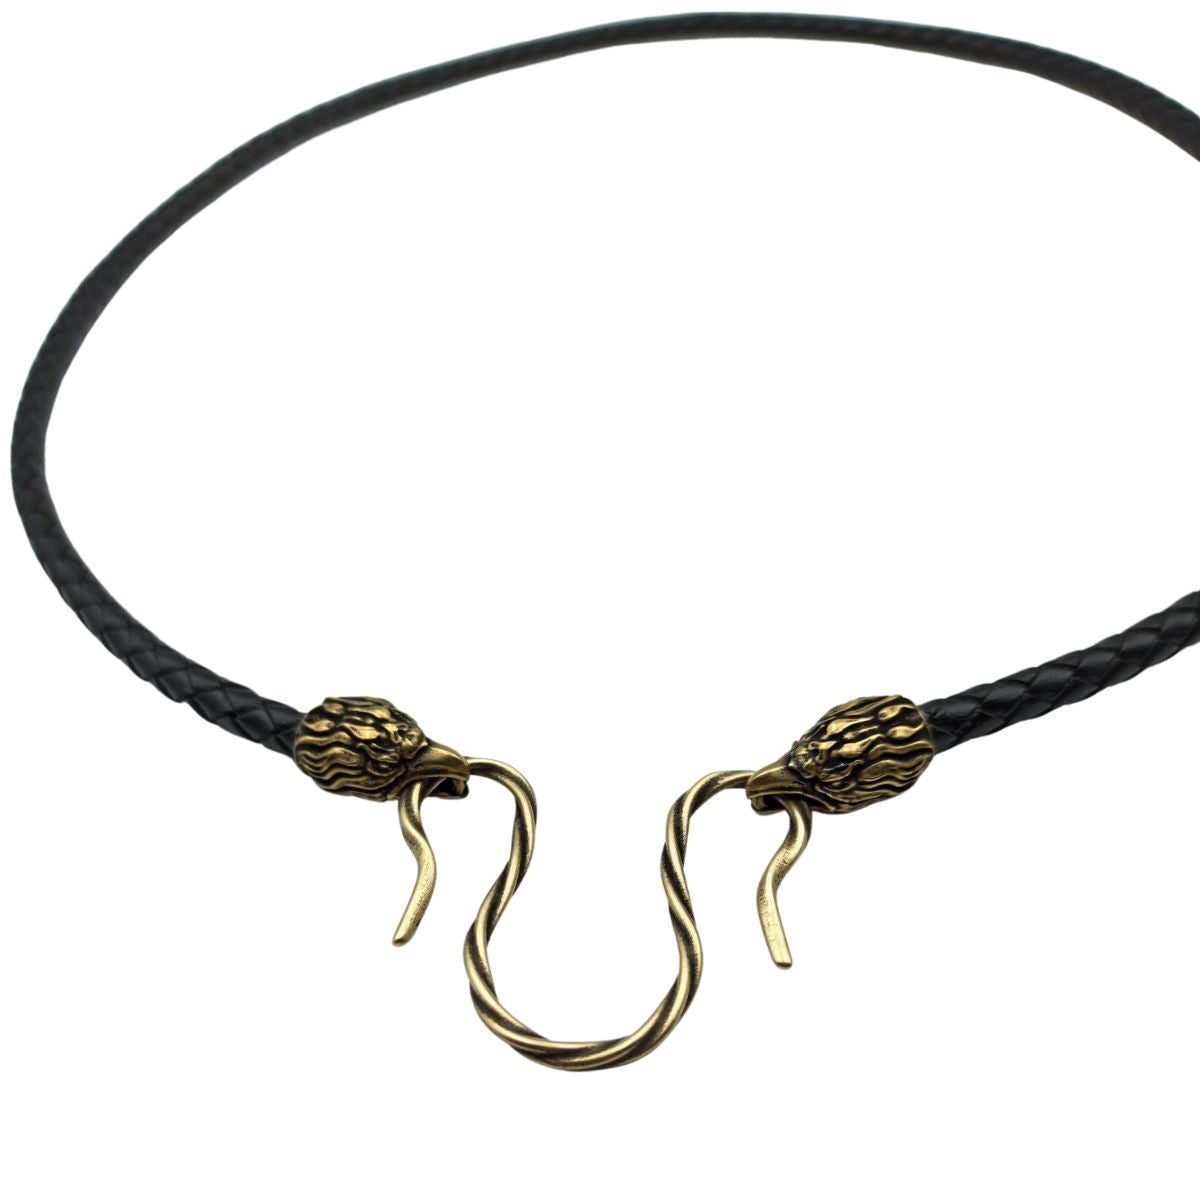 Eagle leather necklace with Bronze clasps